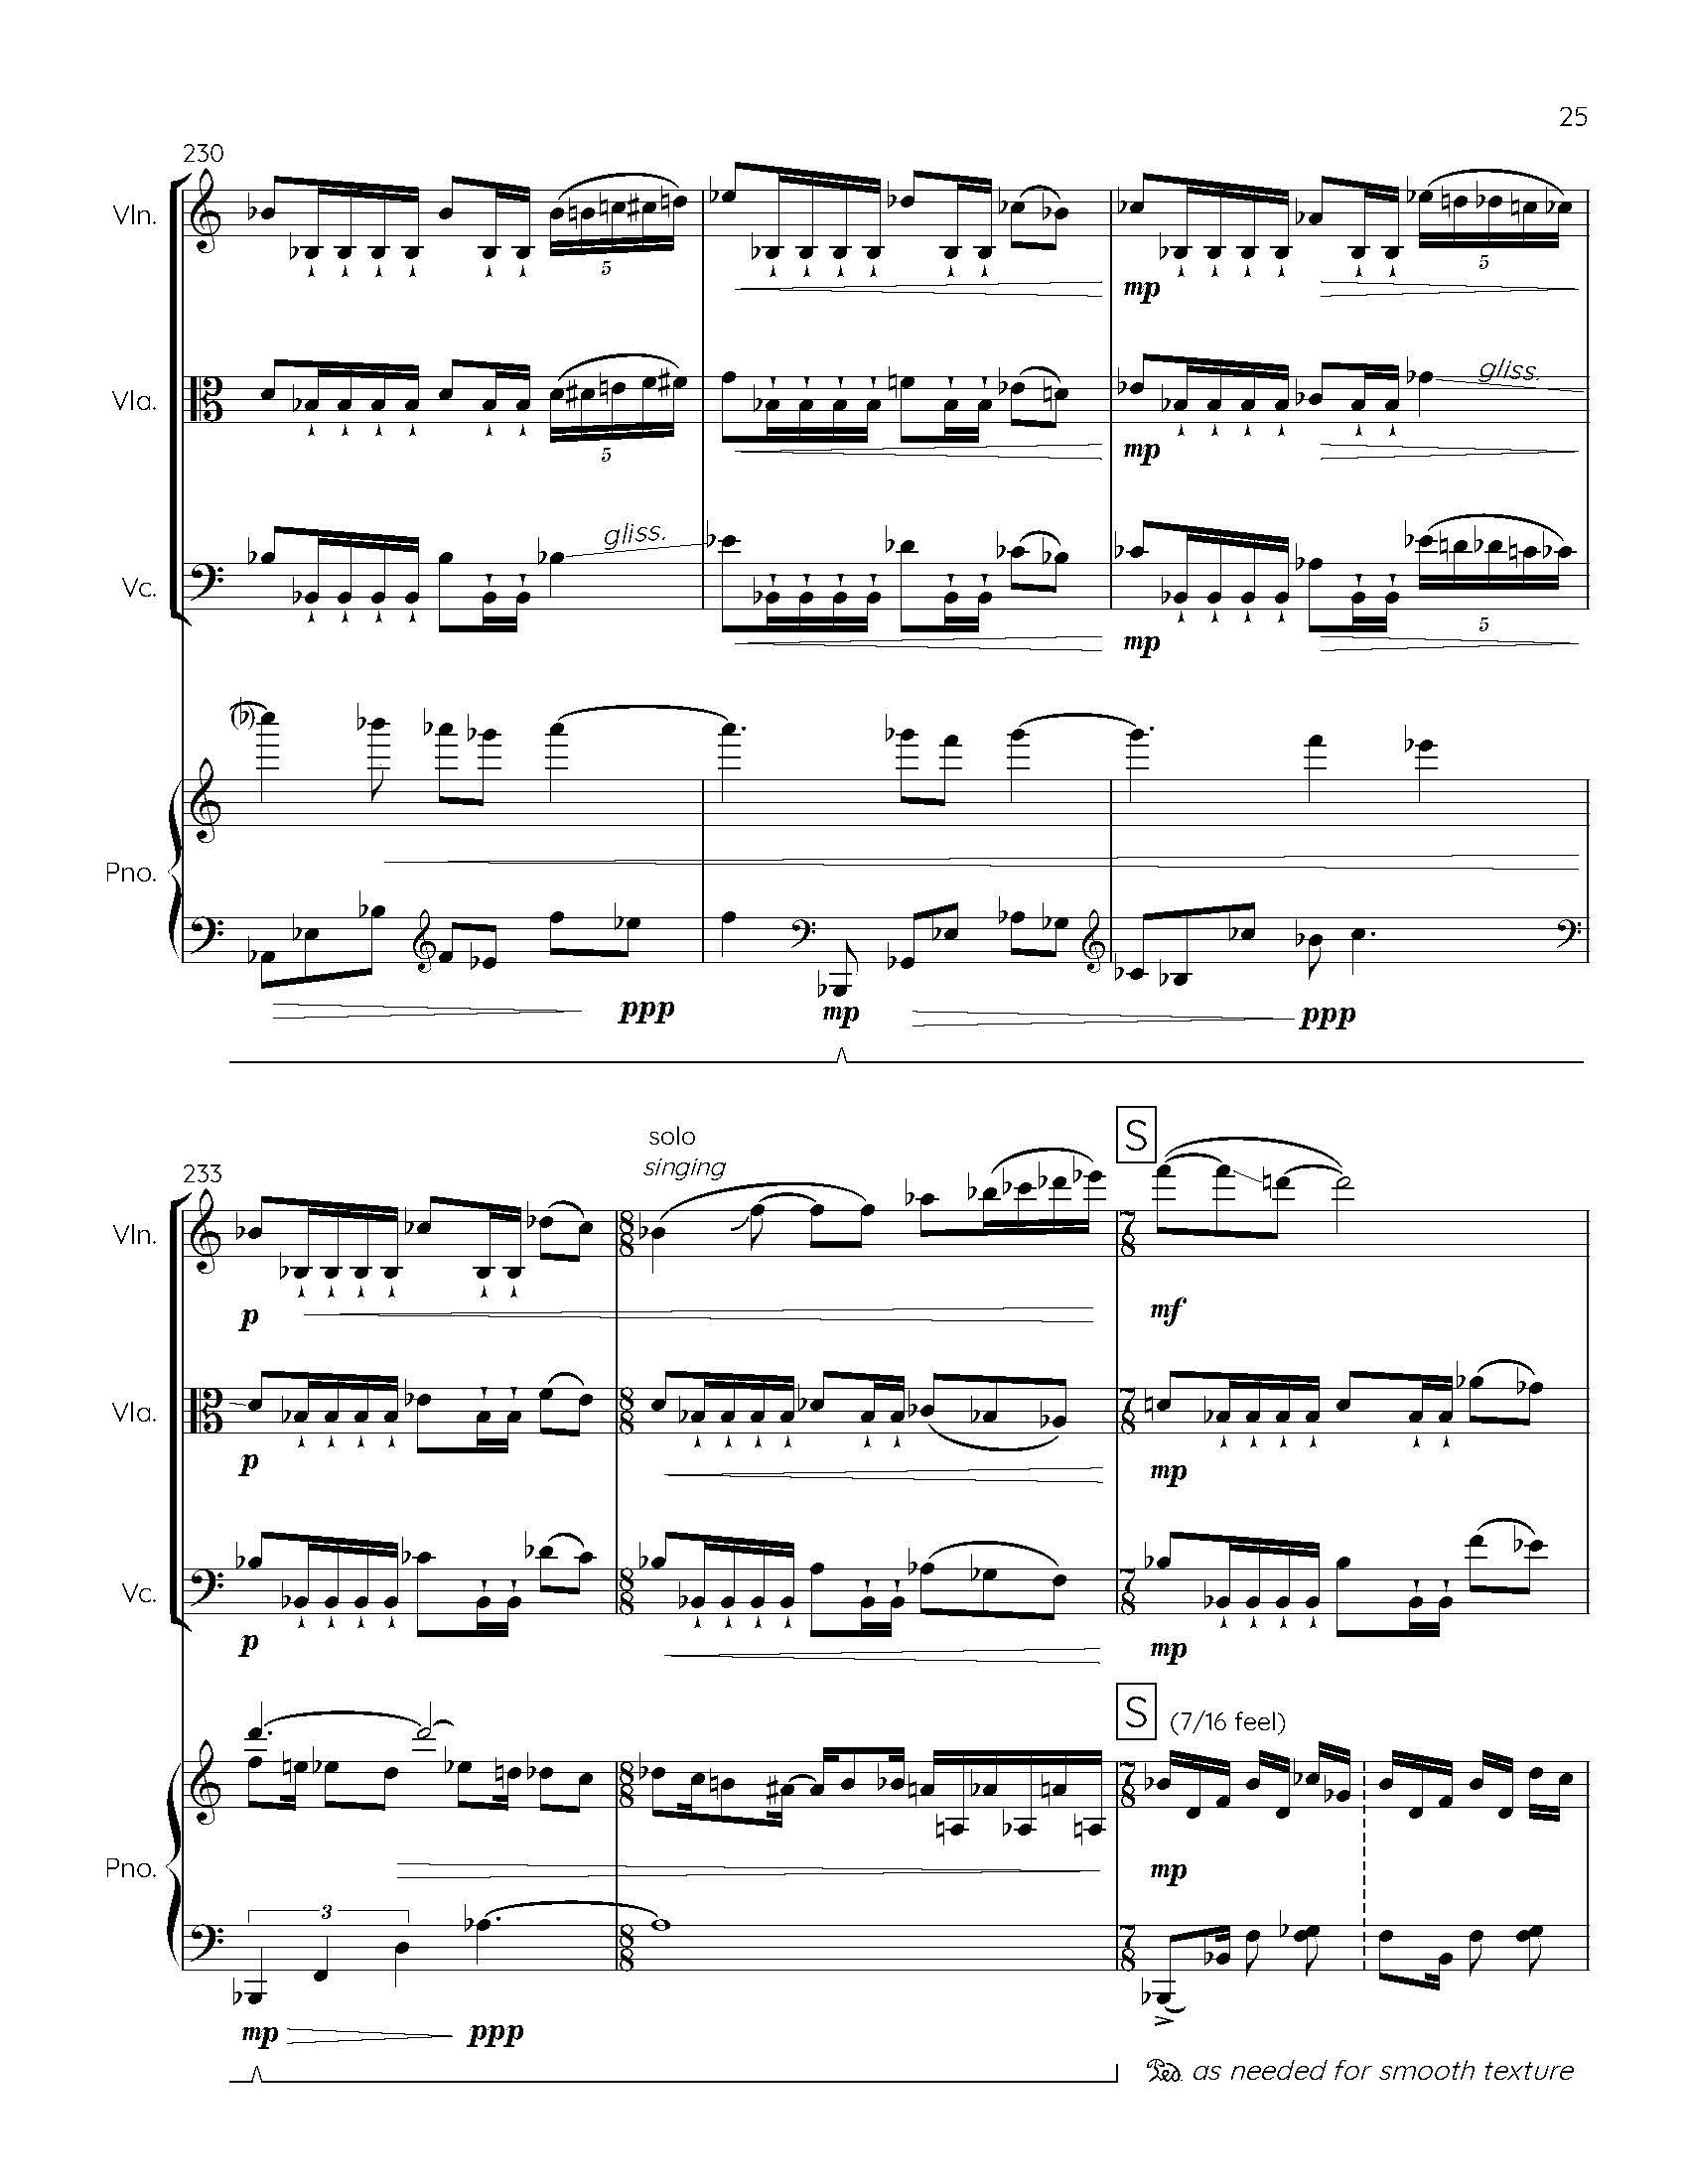 I S L A N D I - Complete Score_Page_31.jpg